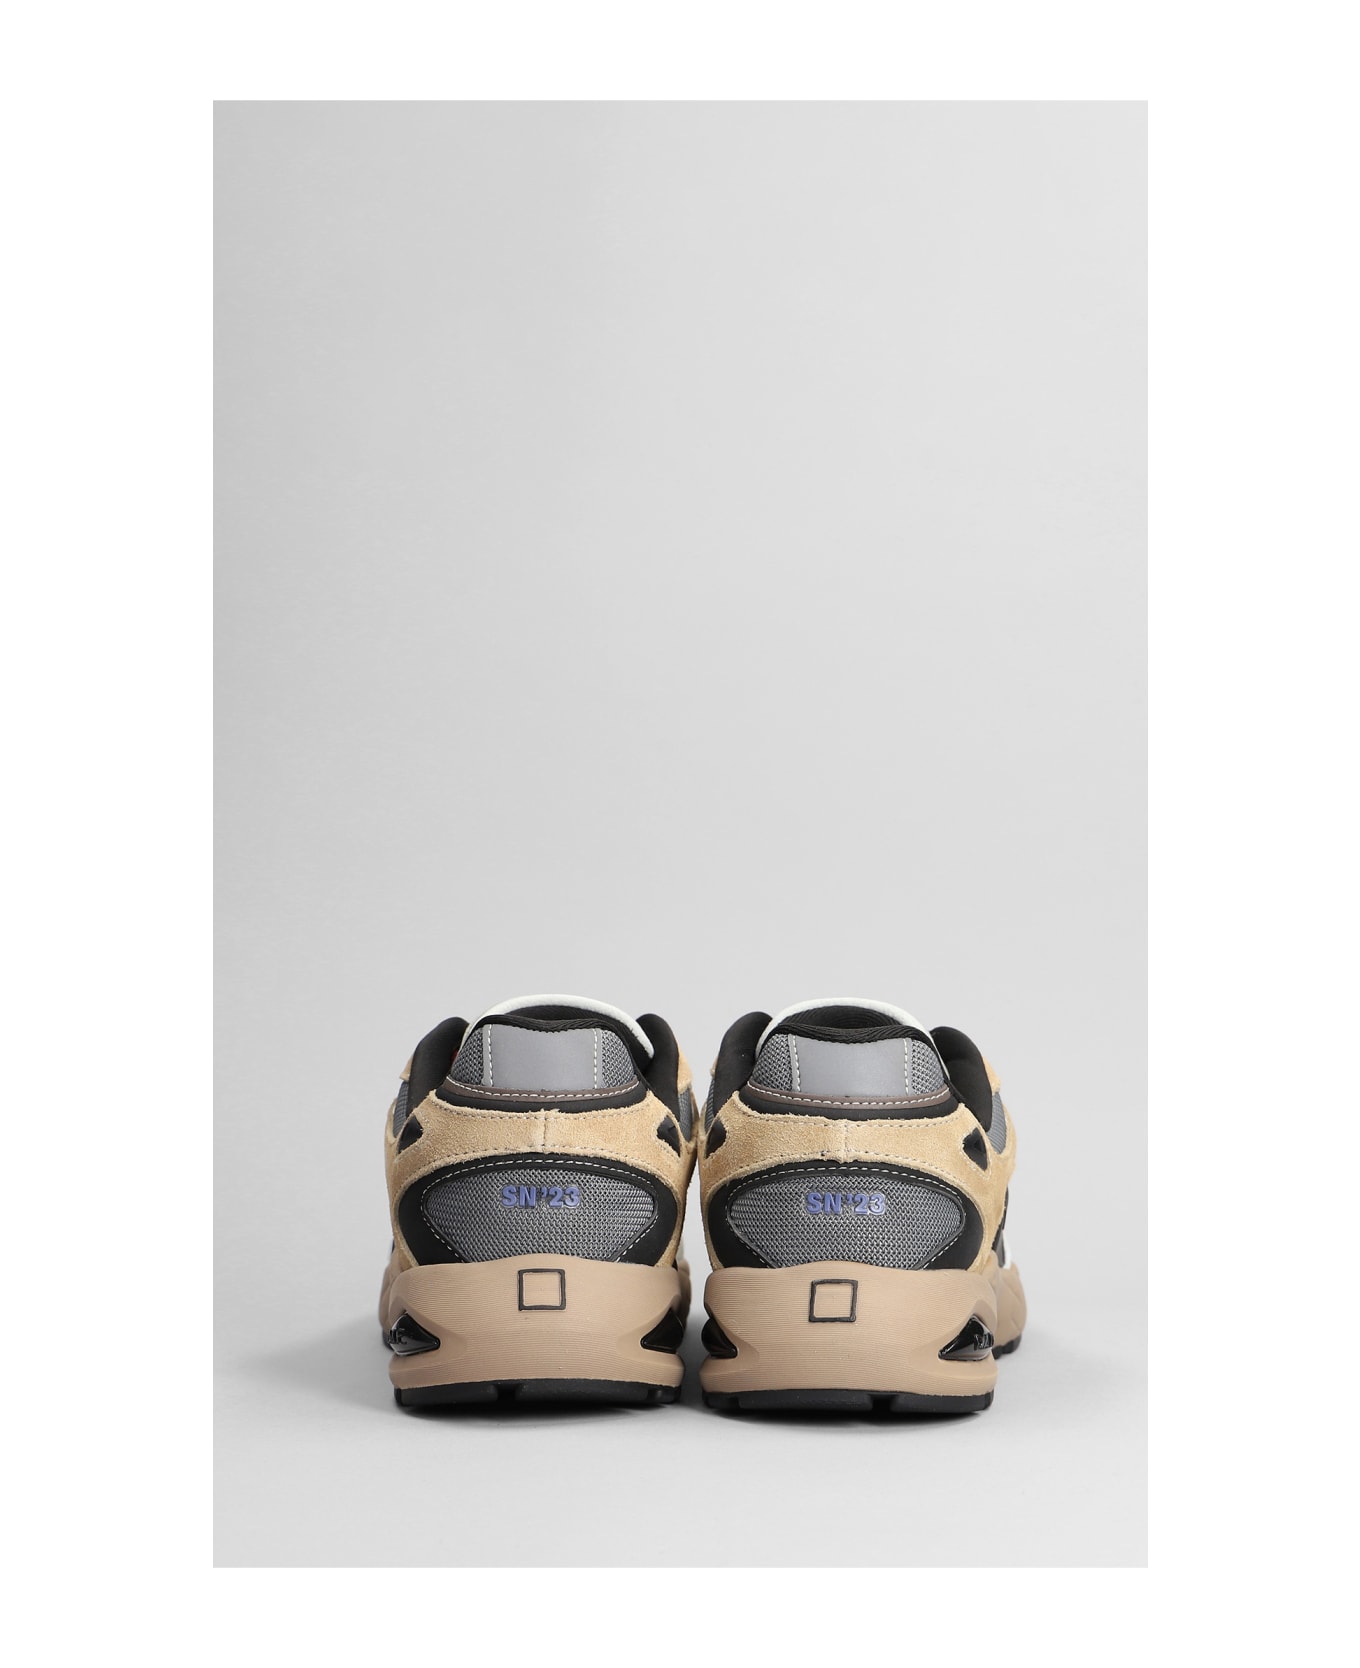 D.A.T.E. Sn 23 Collection Sneakers In Grey Suede And Fabric - grey